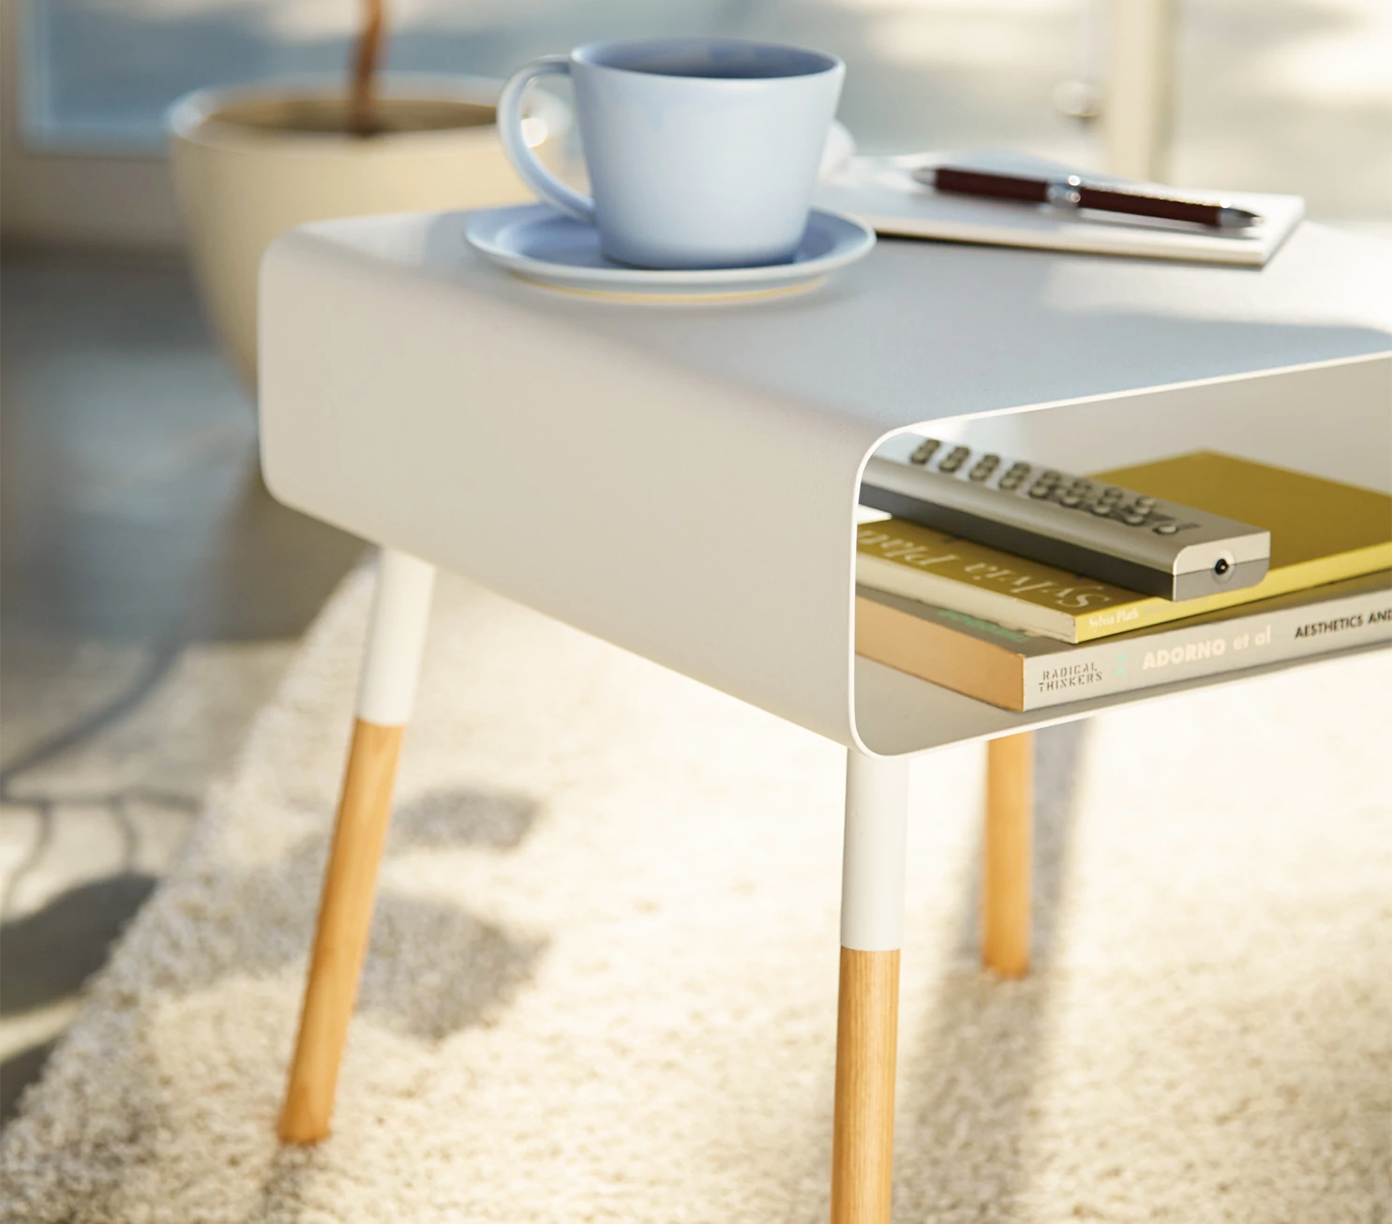 Short White Storage Table by Yamazaki with a coffee cup and books on the surface